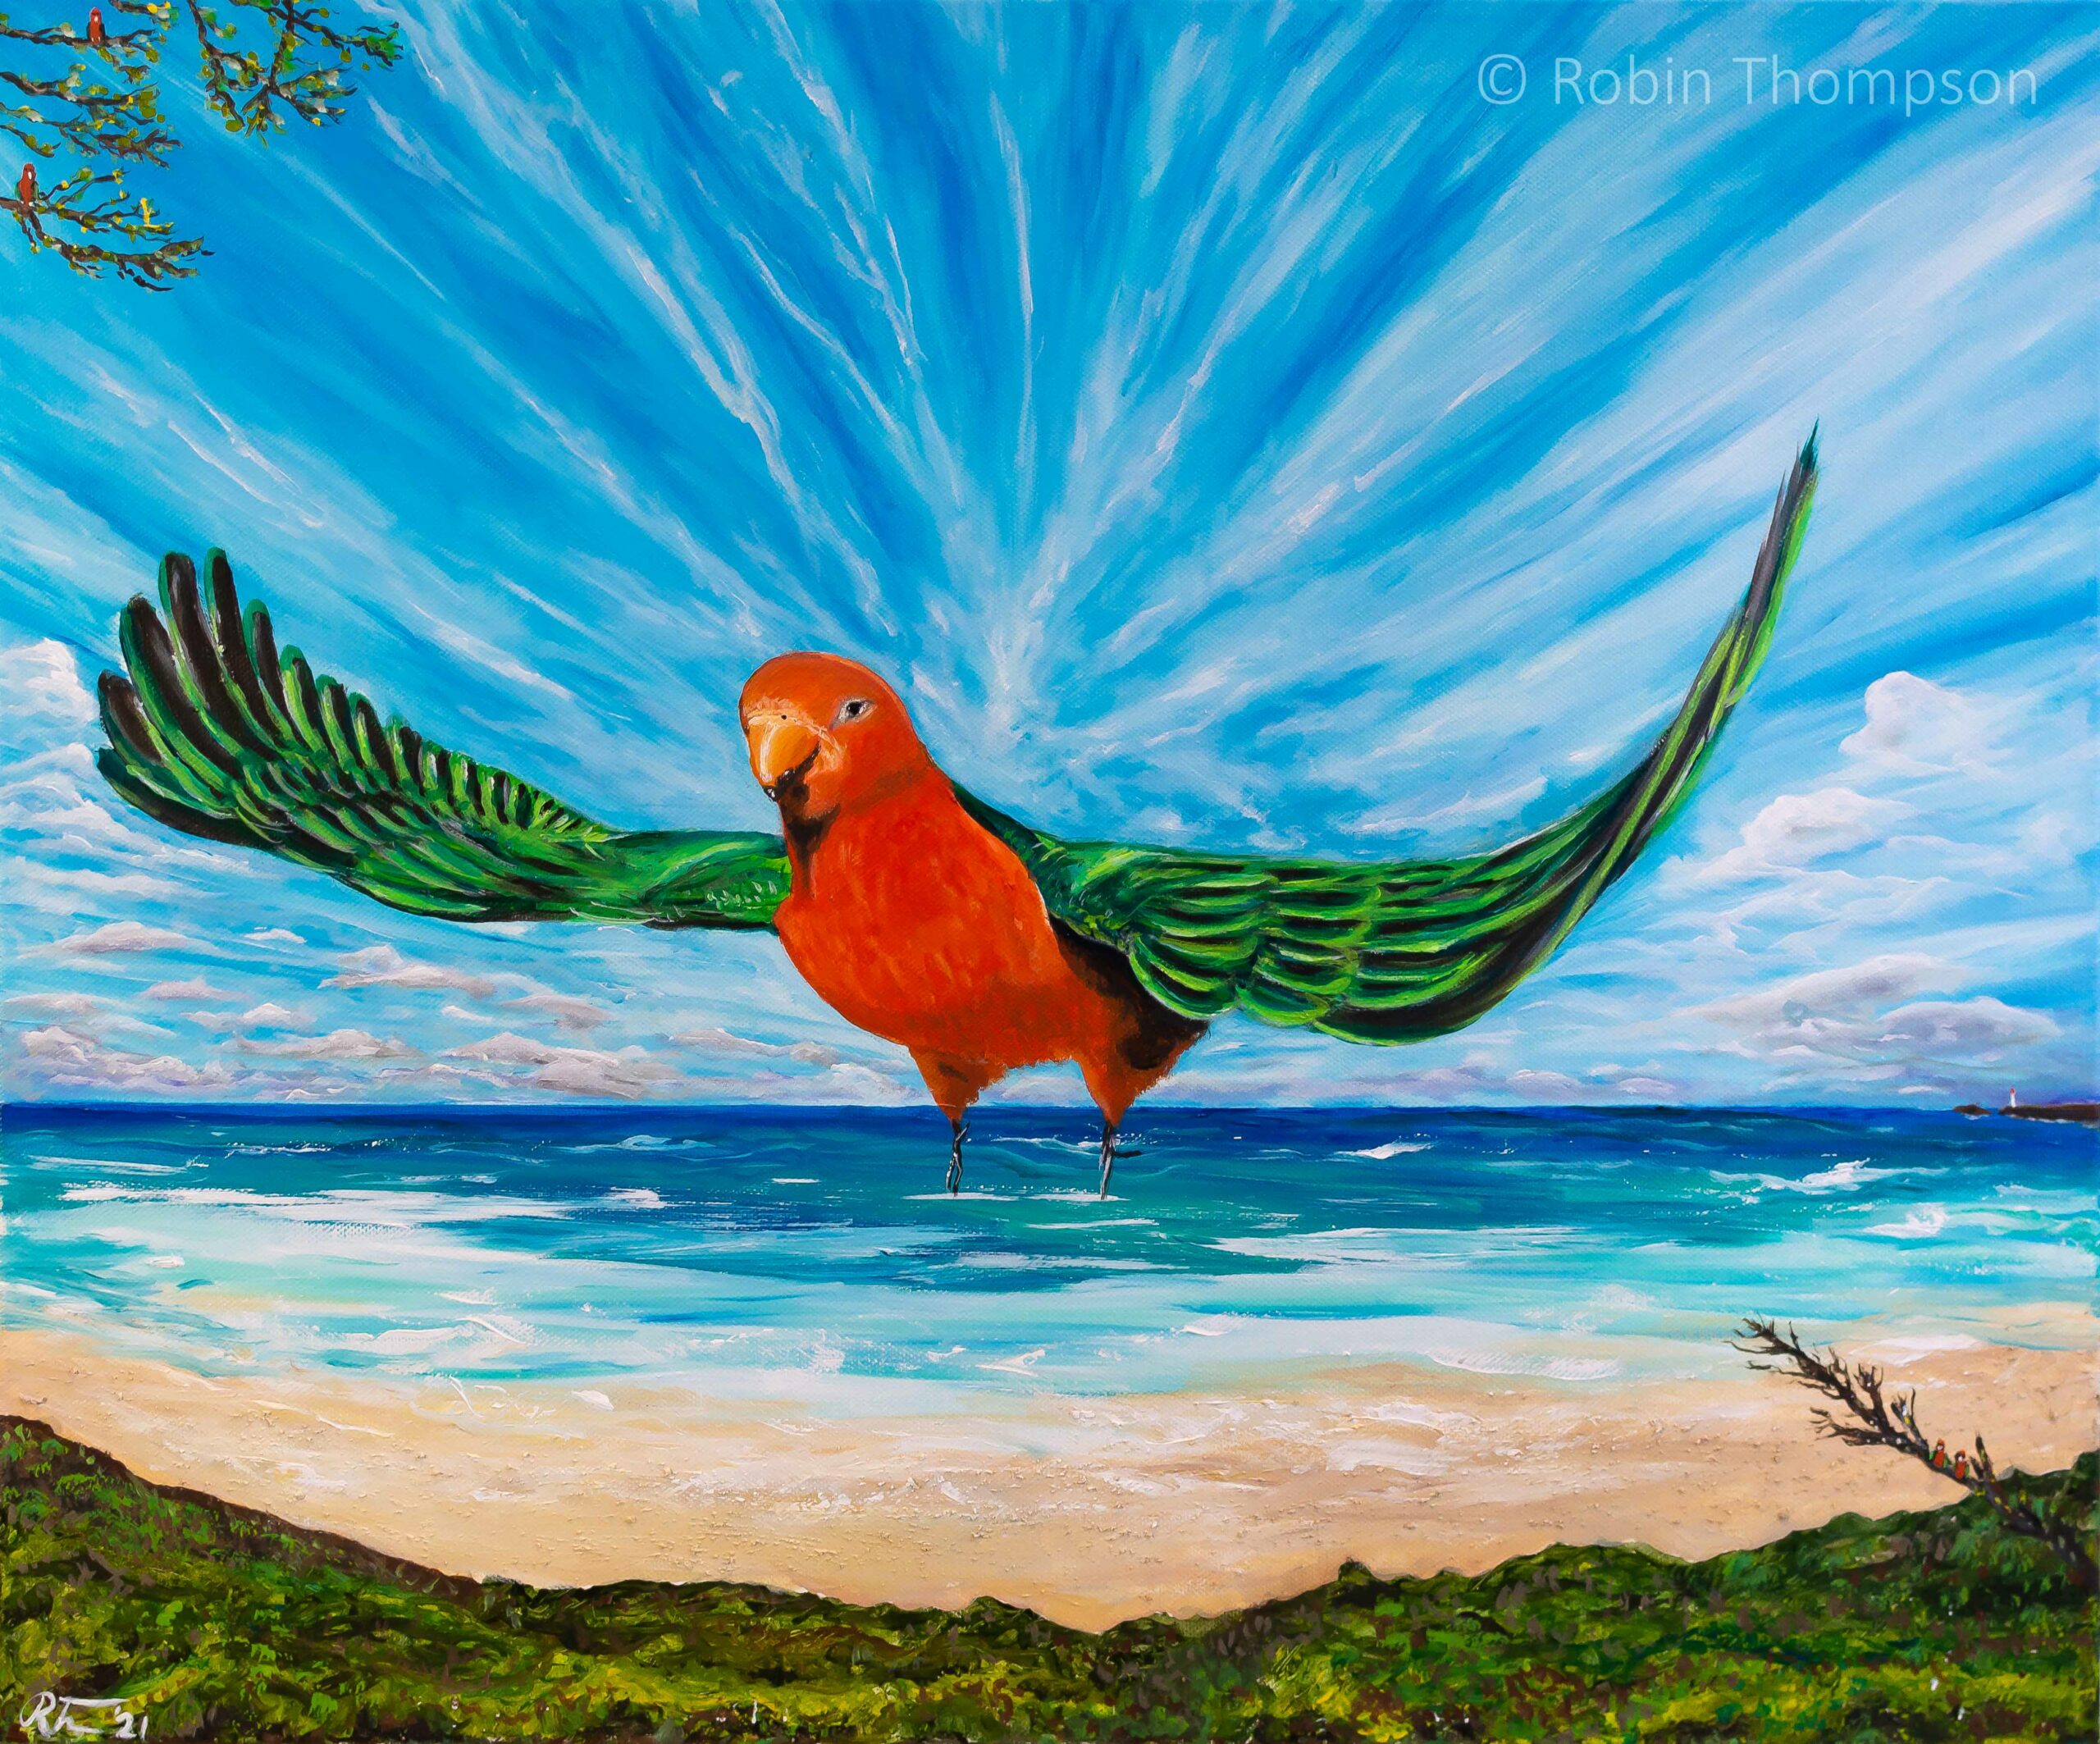 Acylic painting of a red and green Australian King Parrot flying over a large beach landscape. Dramatic clouds and white sandy beaches emphasise the scene and the figure of the parrot in the centre of the painting.